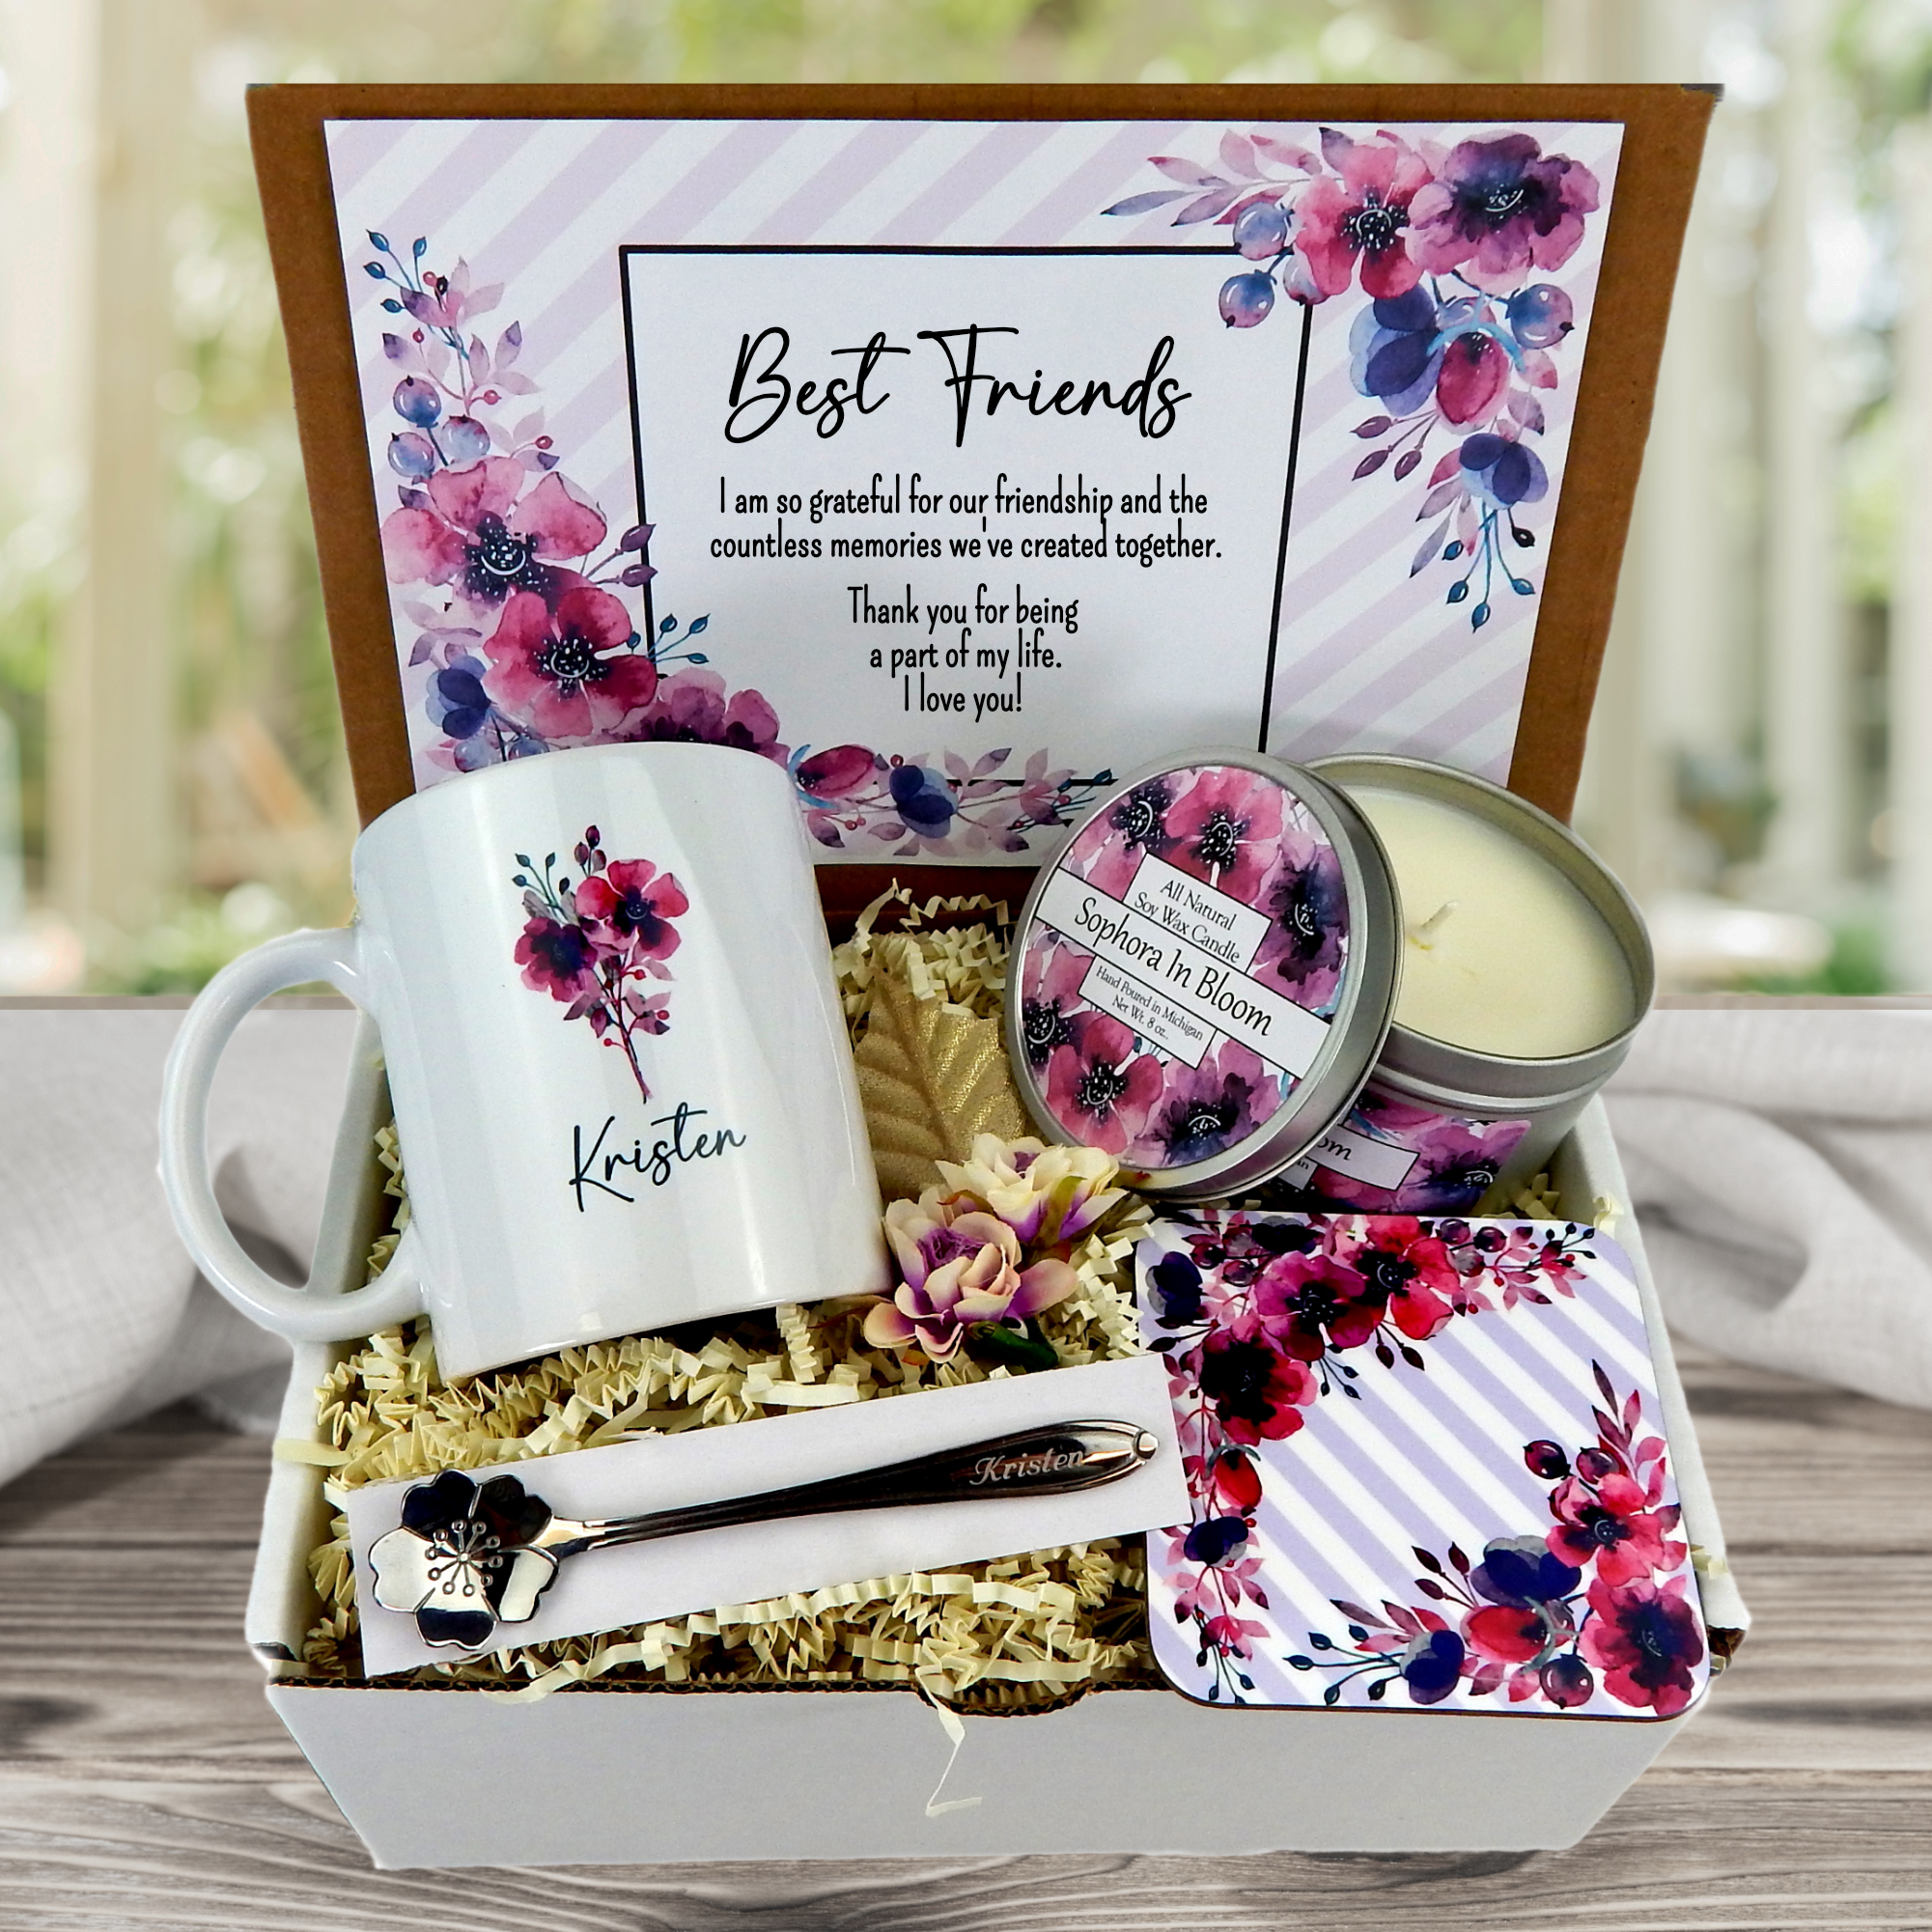 12 Thoughtful Wedding Gifts to Buy for Your Best Friend | Oilpixel